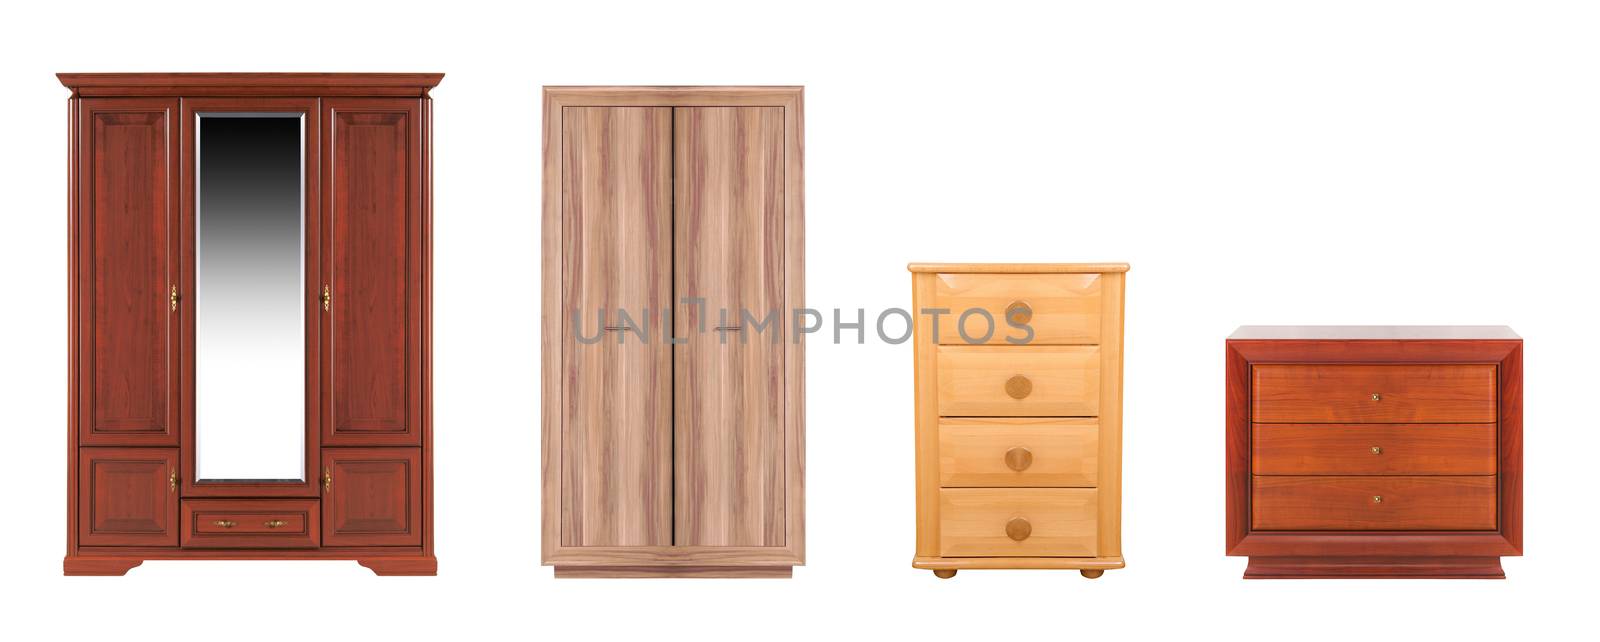 different modern wooden wardrobes on a white